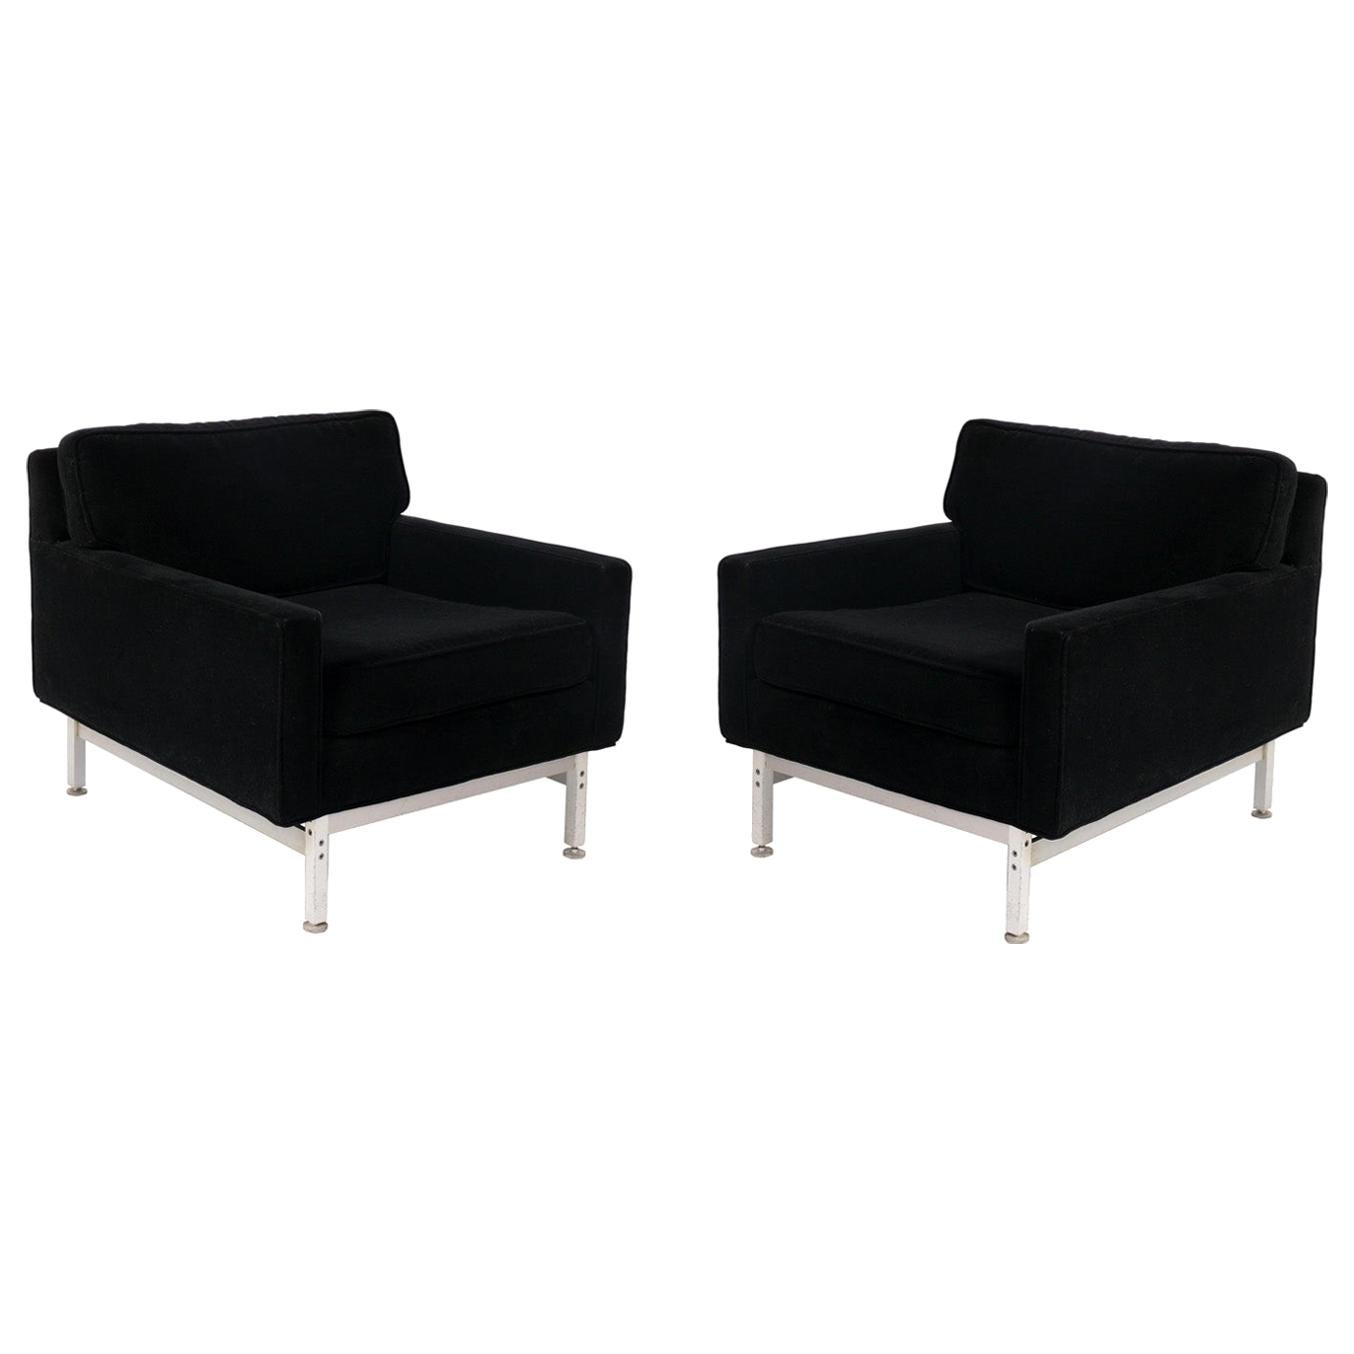 Pair of Mid Century Lounge Chairs by Jules Heumann for Metropolitan